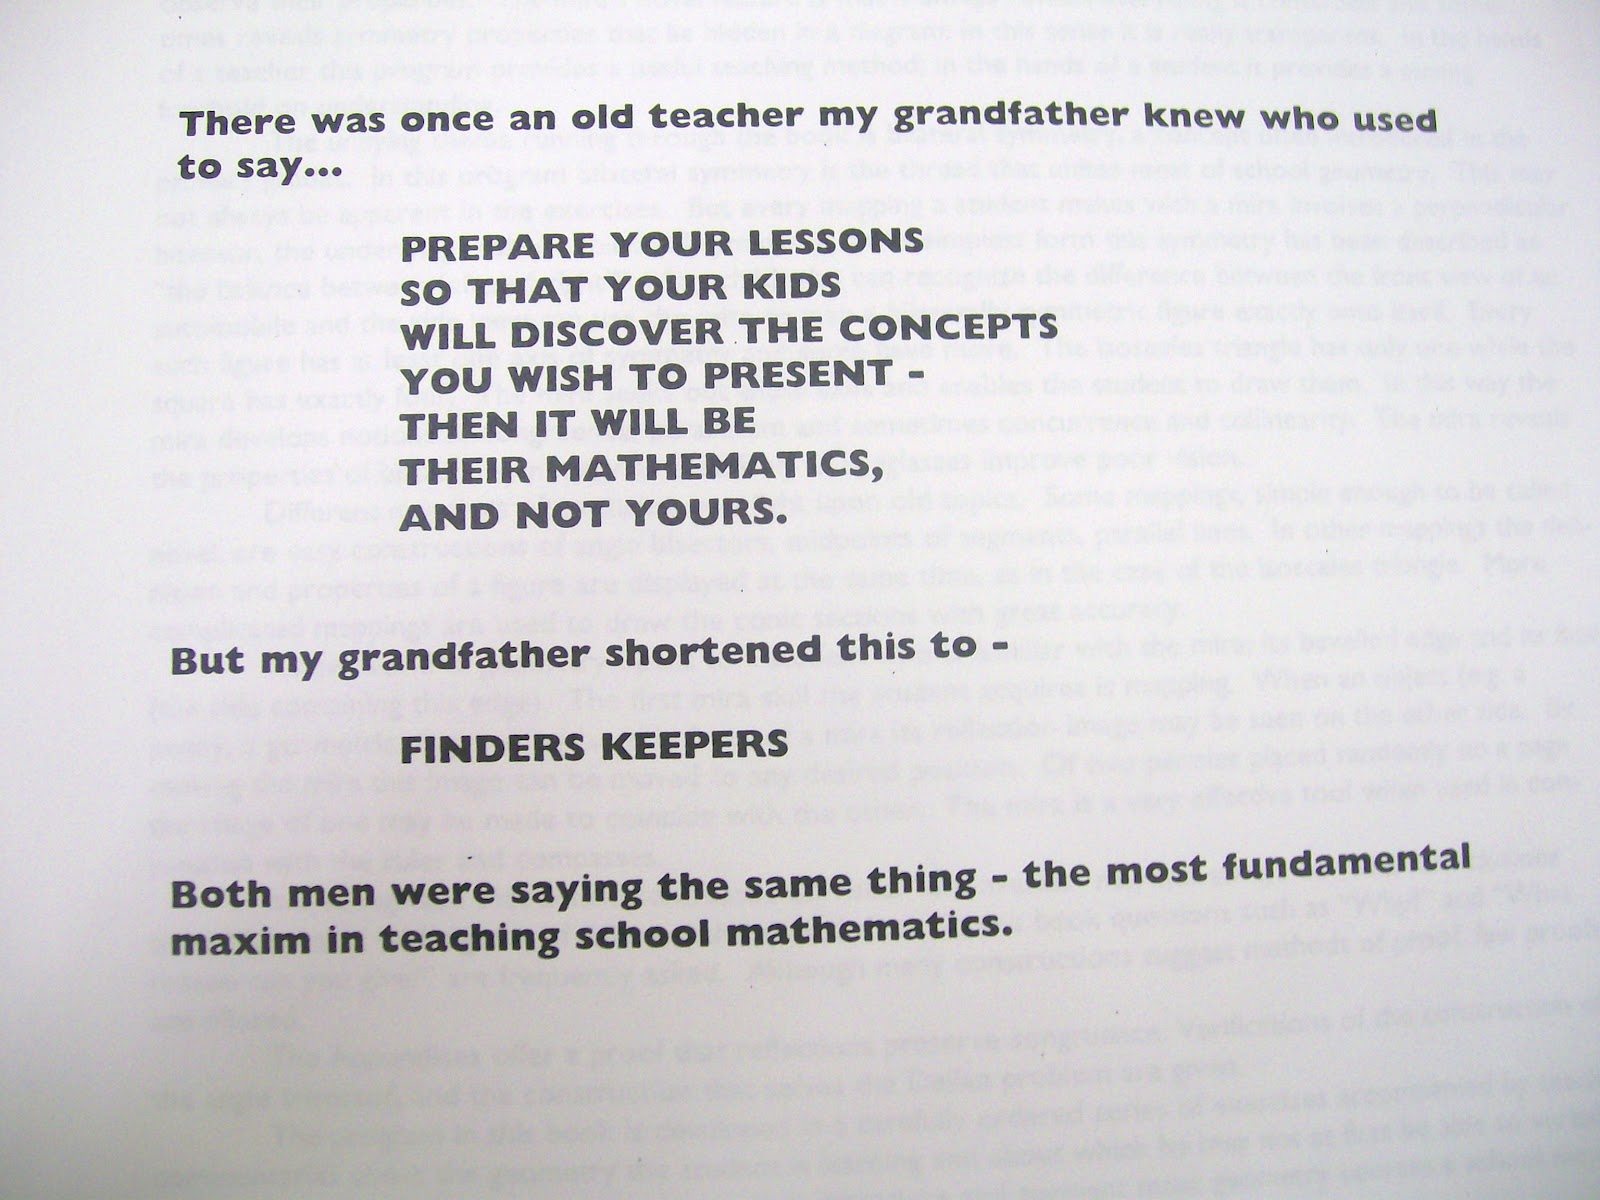 Quote: "there was once an old teacher my grandfather knew who used to say... prepare your lessons so that your kids will discover the concepts you wish to present - then it will be their mathematics, and not yours. But my grandfather shortened this to - FINDERS KEEPERS. Both men were saying the same thing - the most fundamental maxim in teaching school mathematics." 